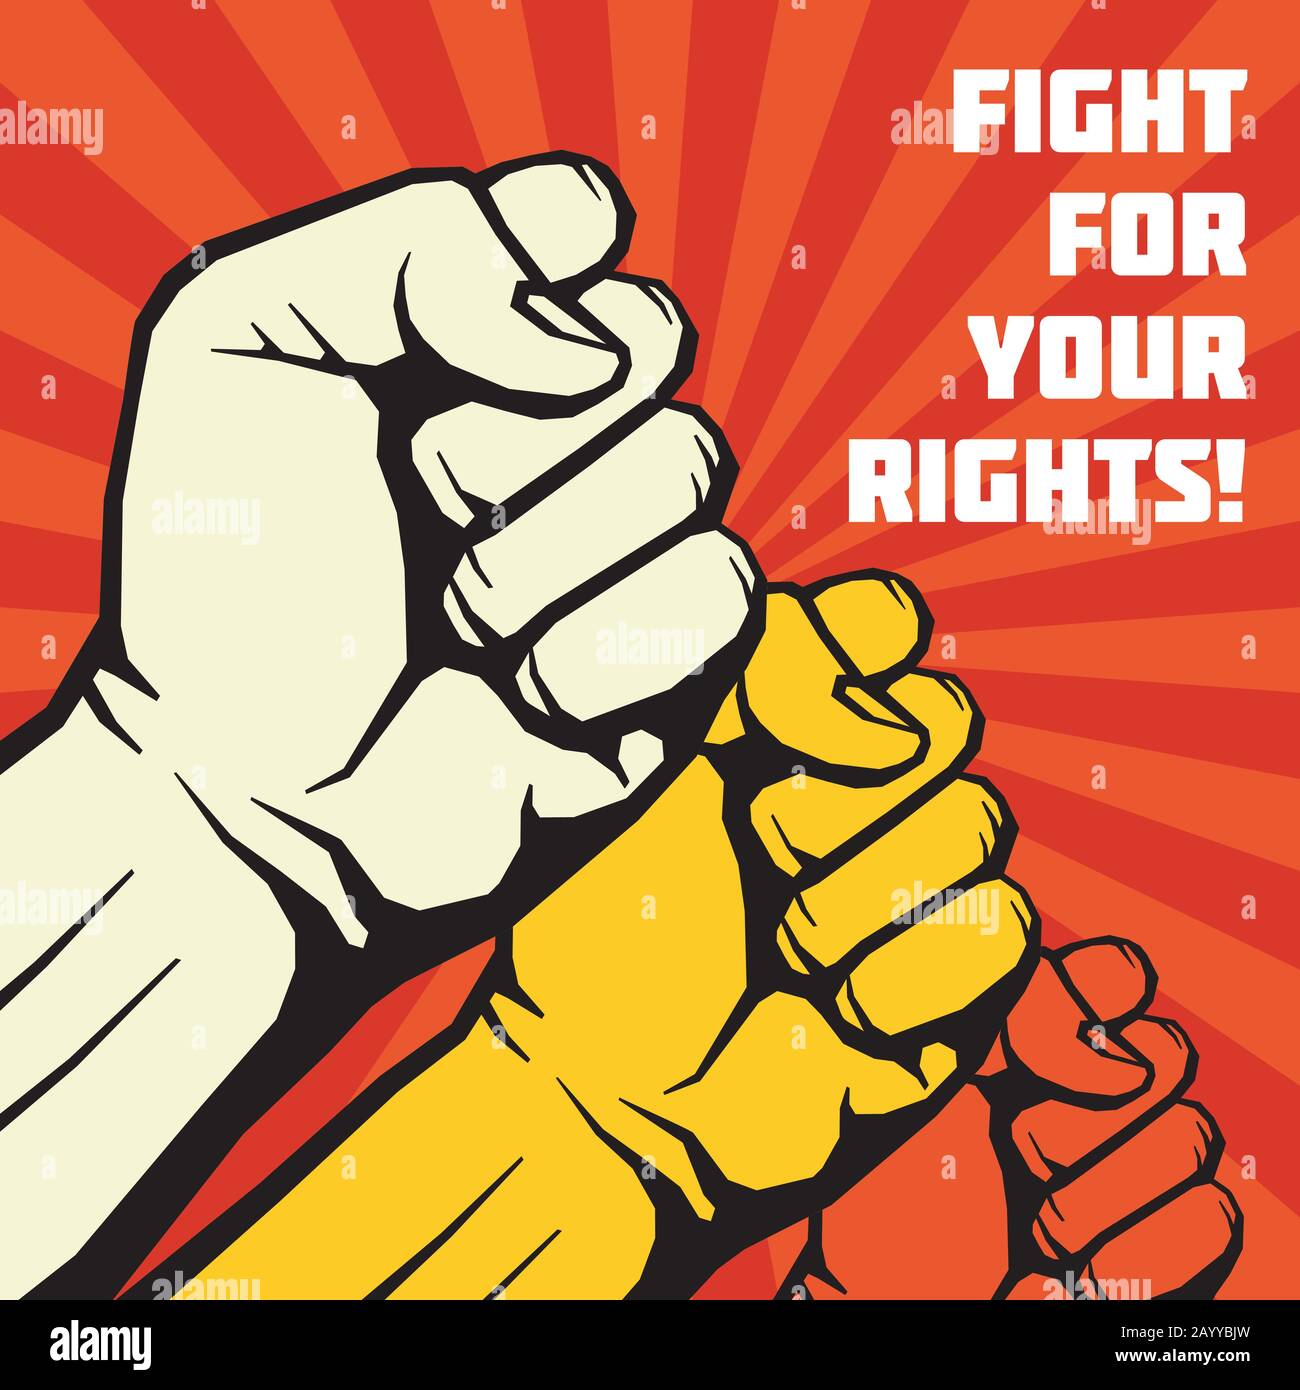 Fight for your rights, solidarity, revolution vector poster. Revolution placard with human fist, illustration of banner to publicize revolution Stock Vector